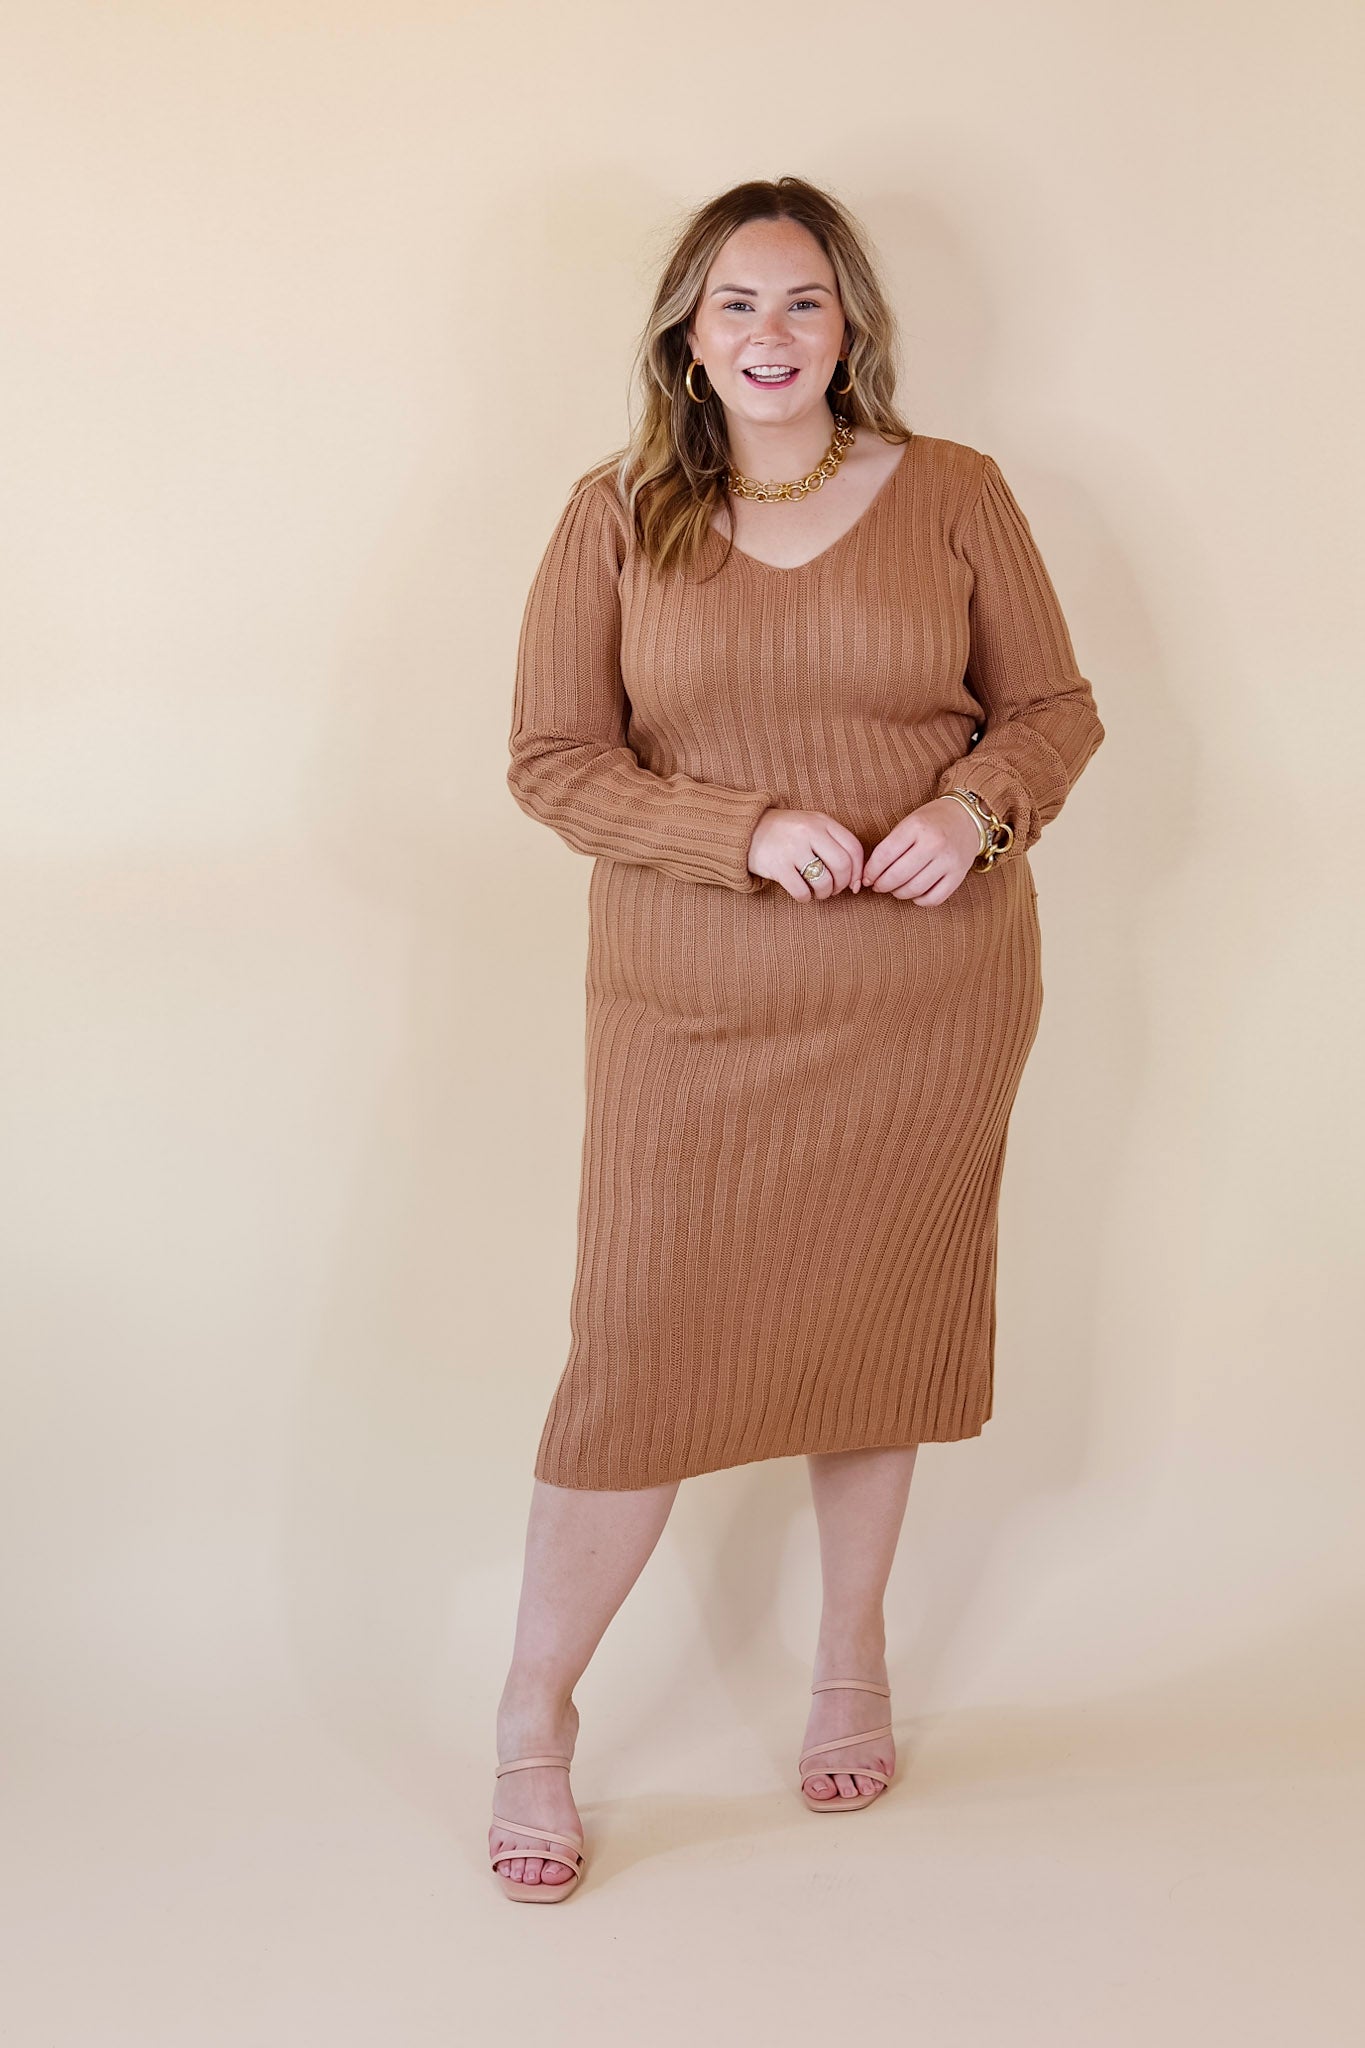 Pumpkin Spice Weather V Neck Midi Sweater Dress in Clay Nude - Giddy Up Glamour Boutique